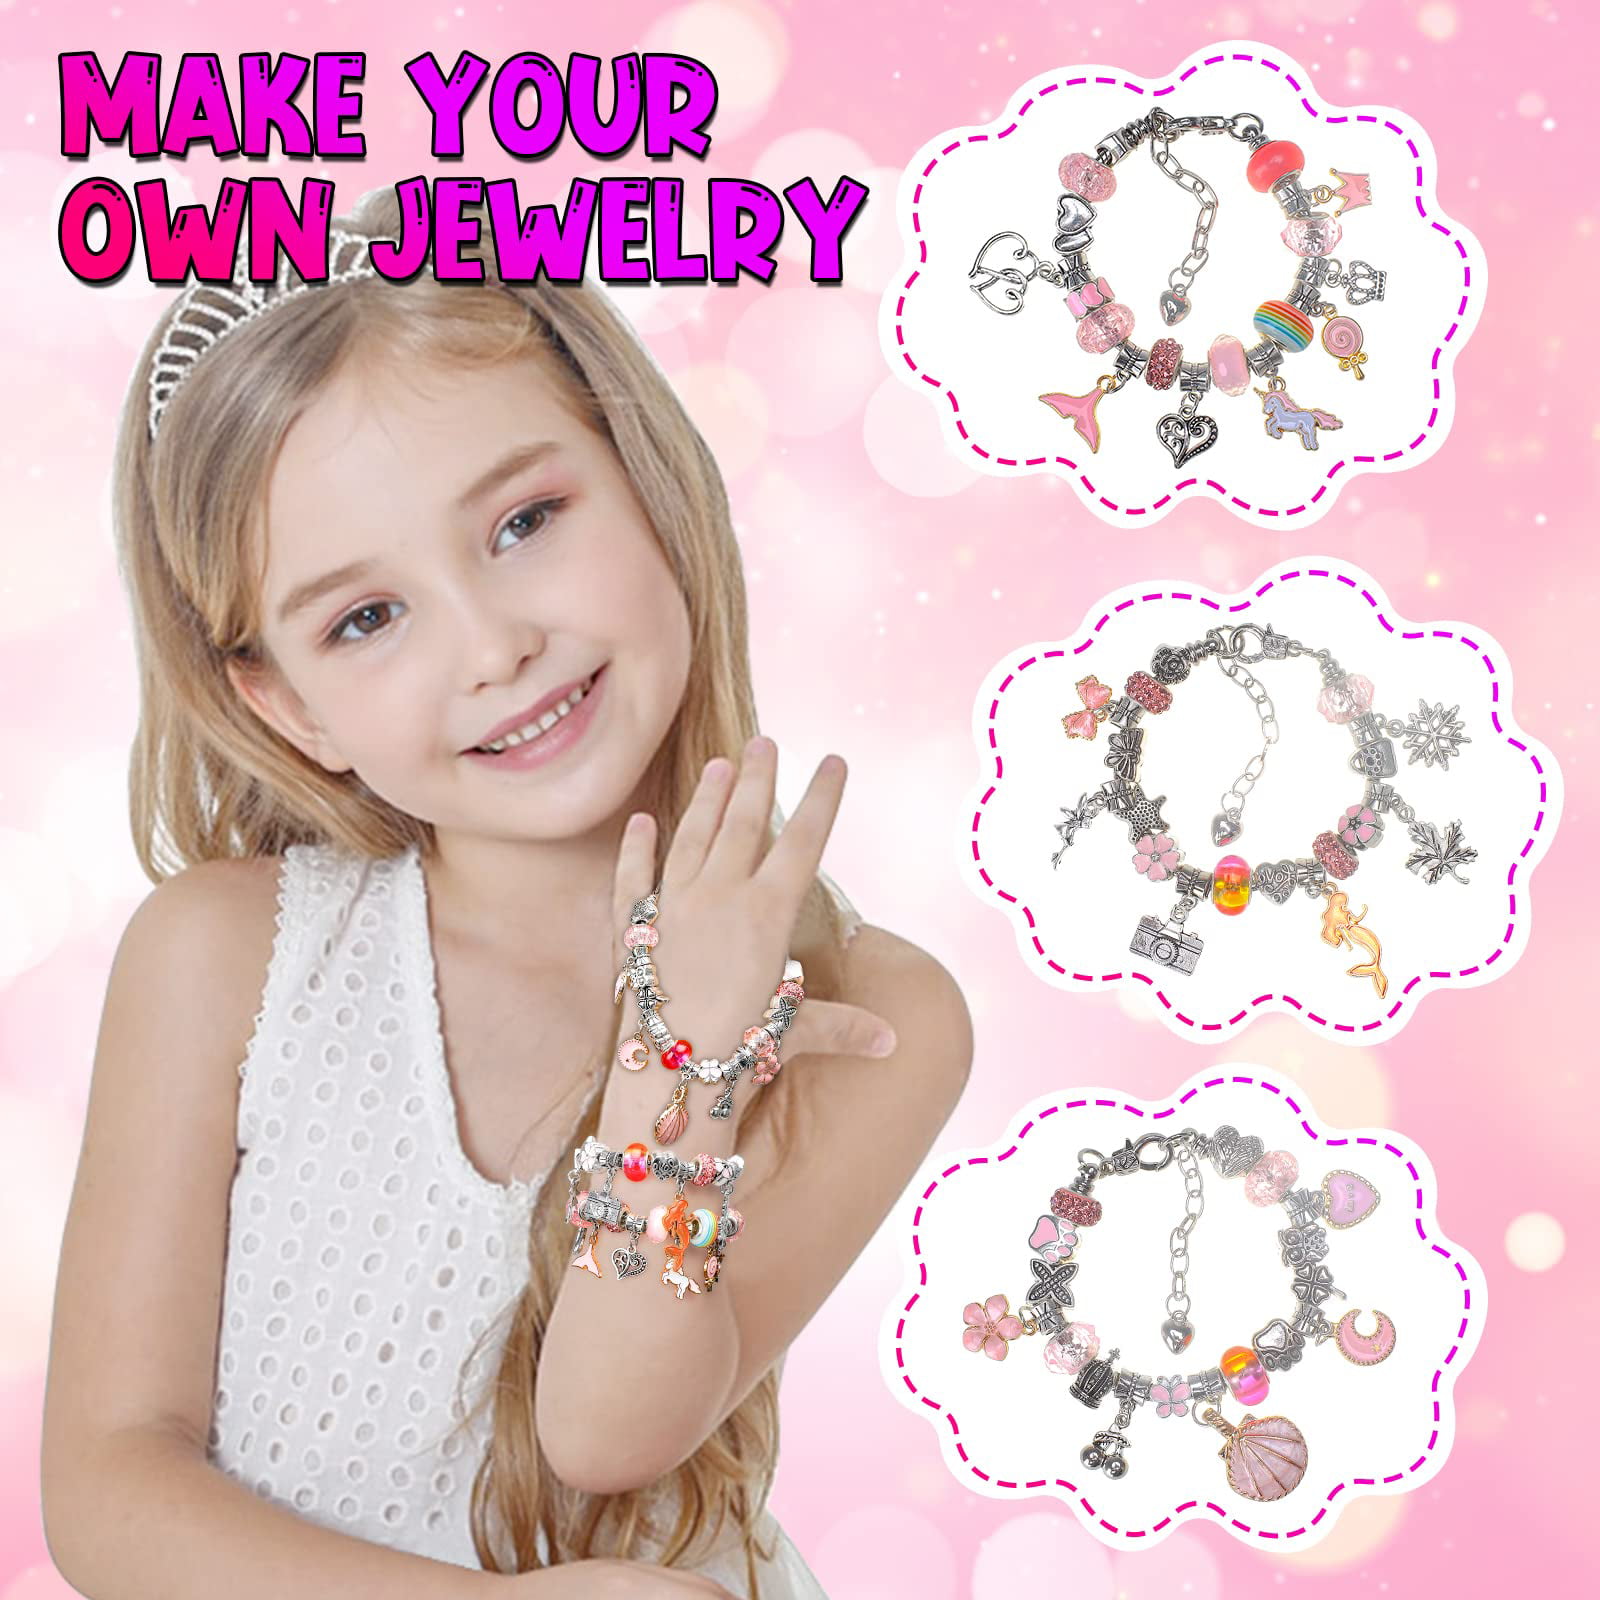  Charm Bracelet Making Kit, Kid Jewelry Making Kit For Girls  8-12, Unicorn Toys For Girls Age 4-6 Birthday Christmas Gifts For Girls  Crafts Age 5-7 DIY Necklace Kit